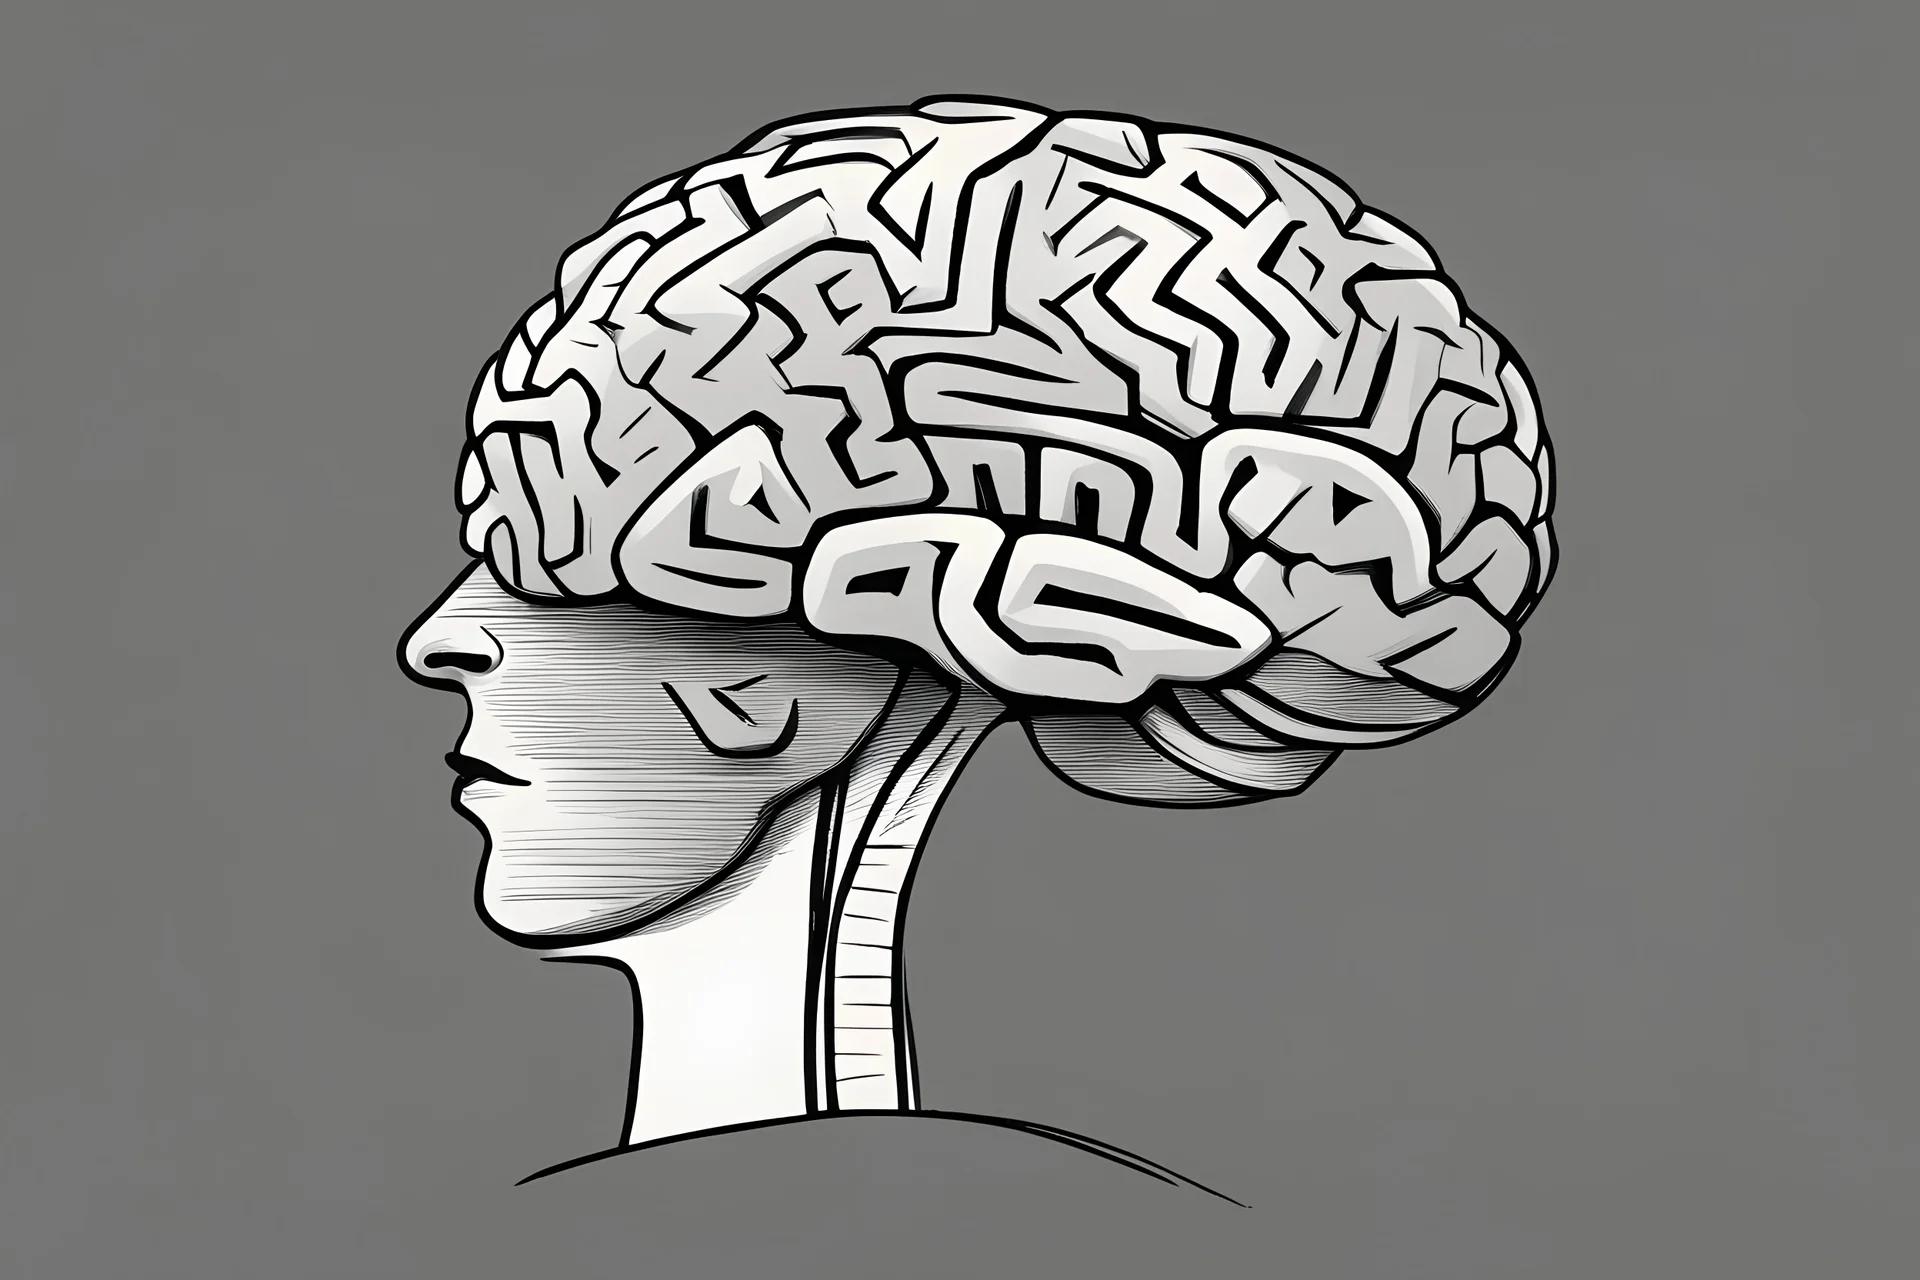 generate an image like a draw minimal style black and white pencil comix minimal style, representing brain strategies for memorizing and remembering a vocabulart